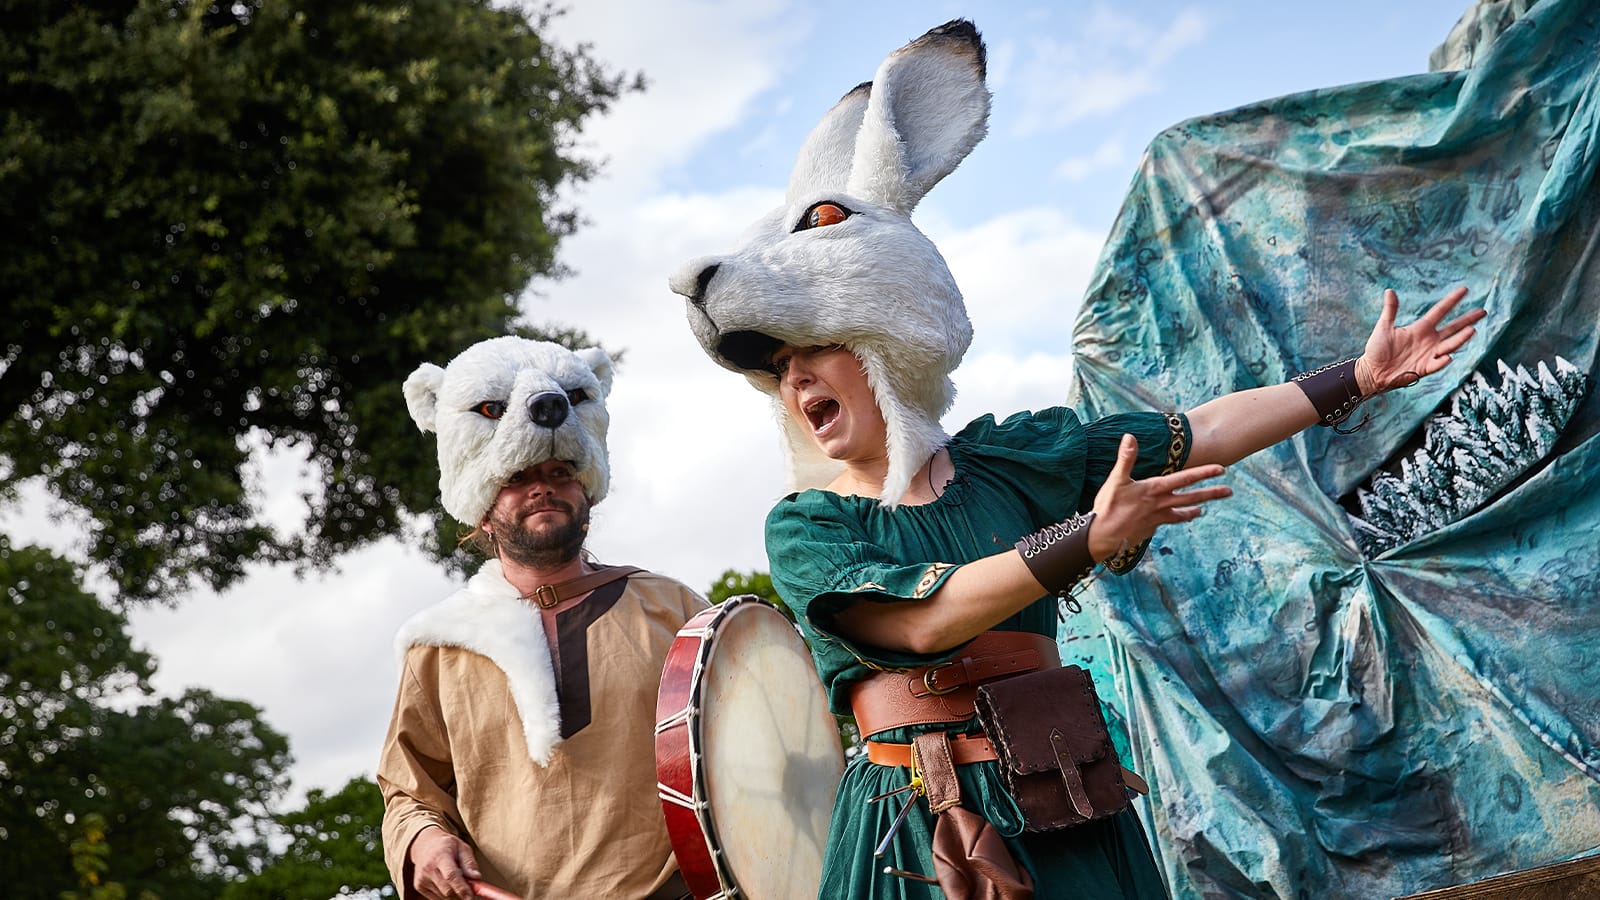 A woman dressed as a hare points to a man dressed as a polar bear